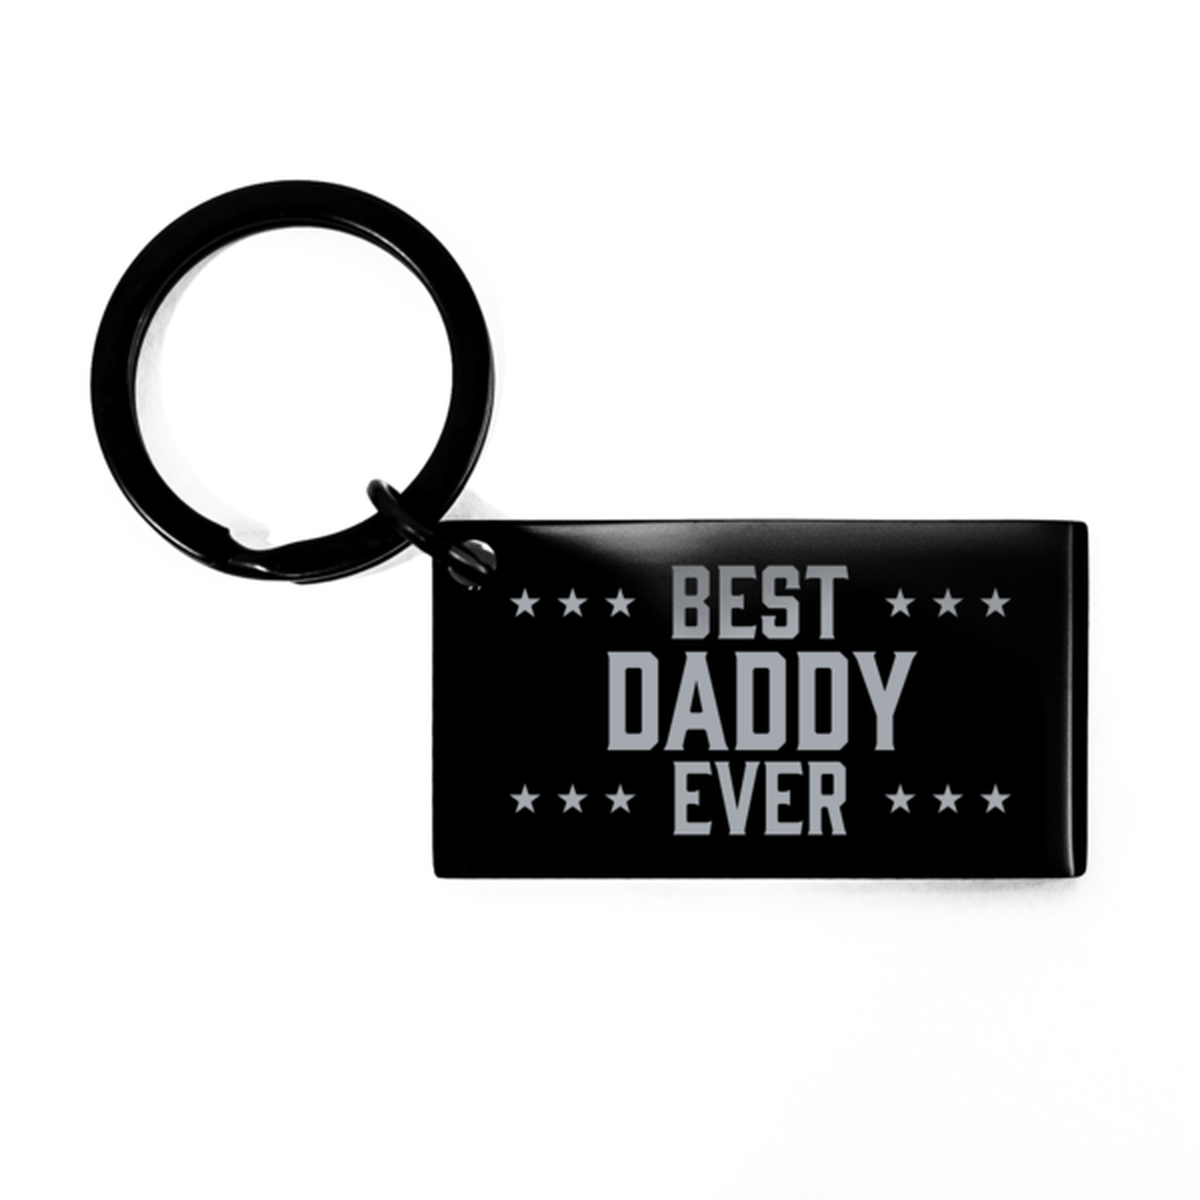 Best Daddy Ever Daddy Gifts, Funny Black Keychain For Daddy, Birthday Engraved Keyring Presents For Men